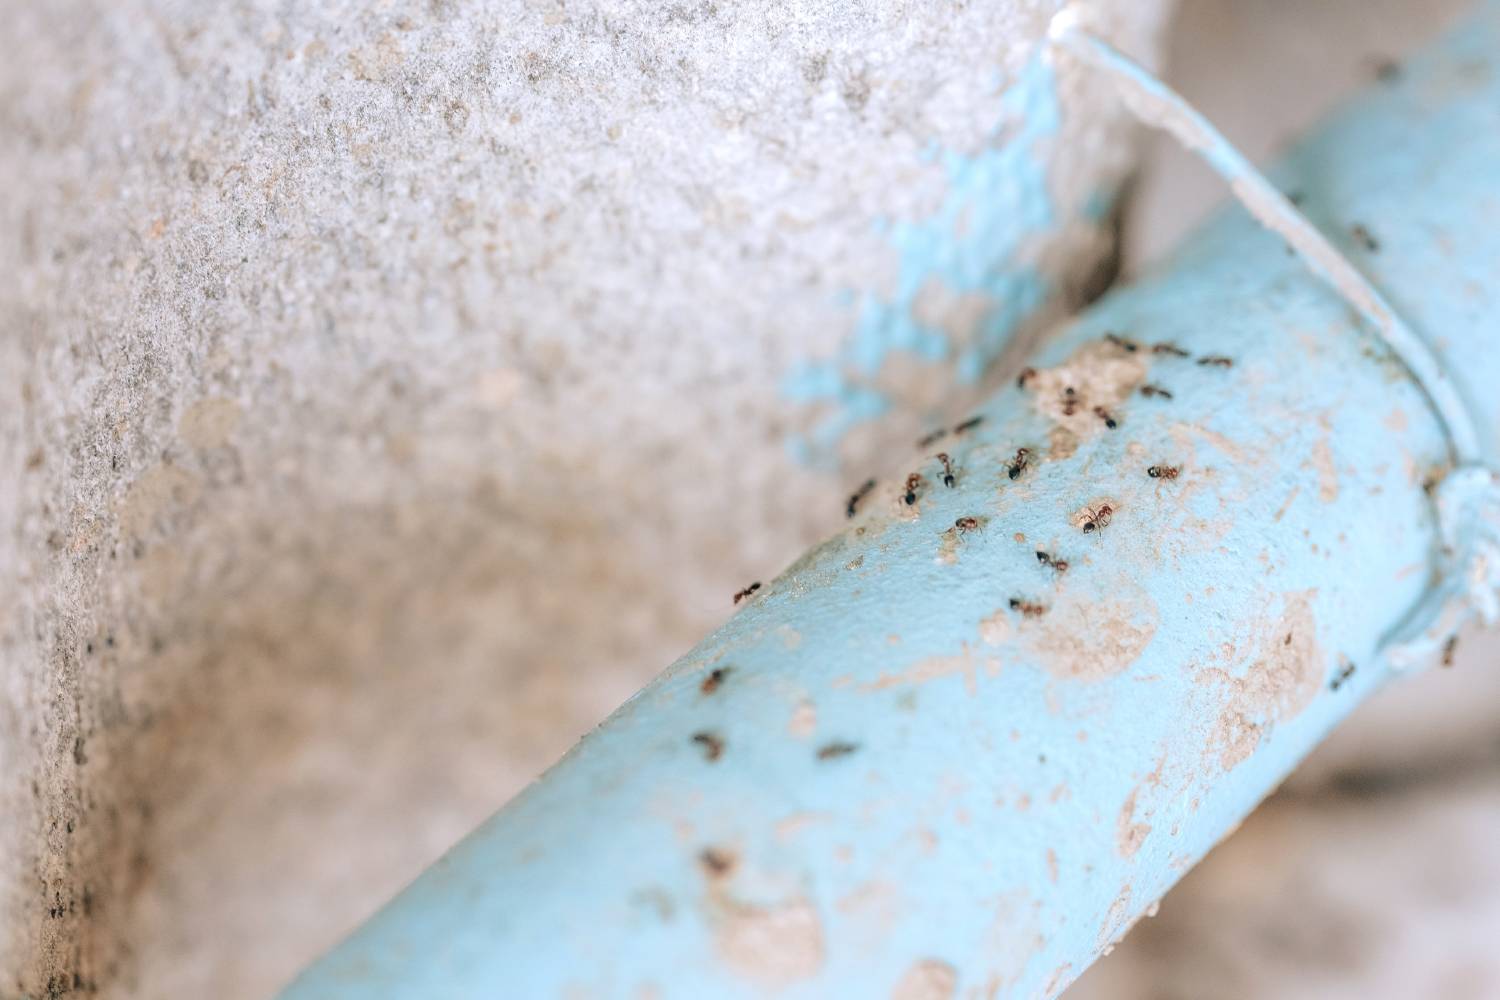 Ants on pipework